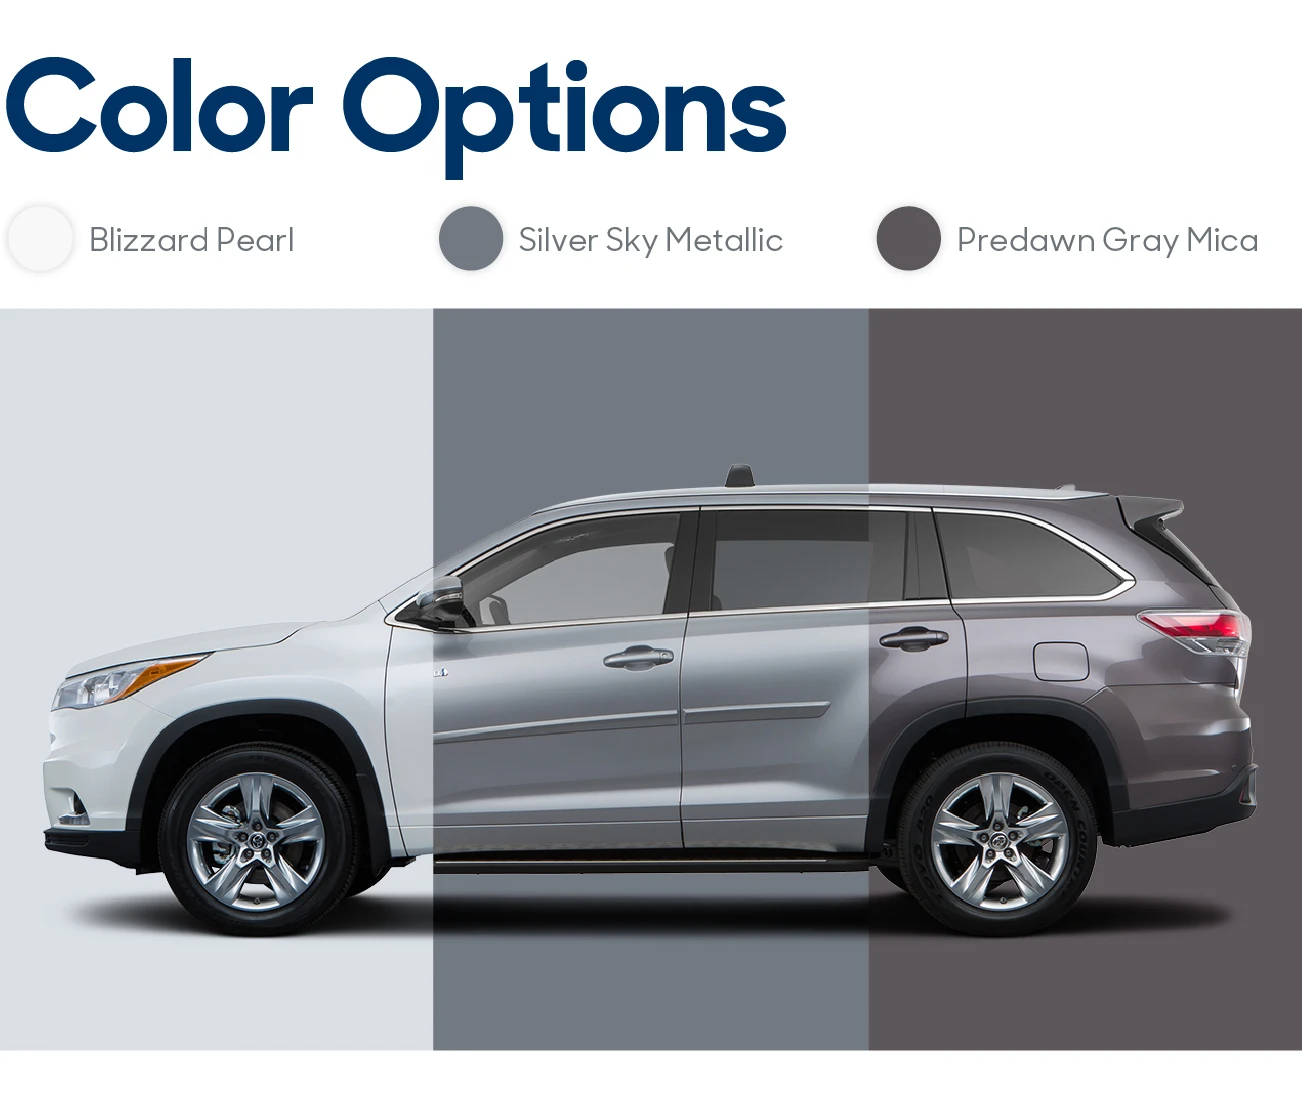 2015 Toyota Highlander Review: Available Colors | CarMax